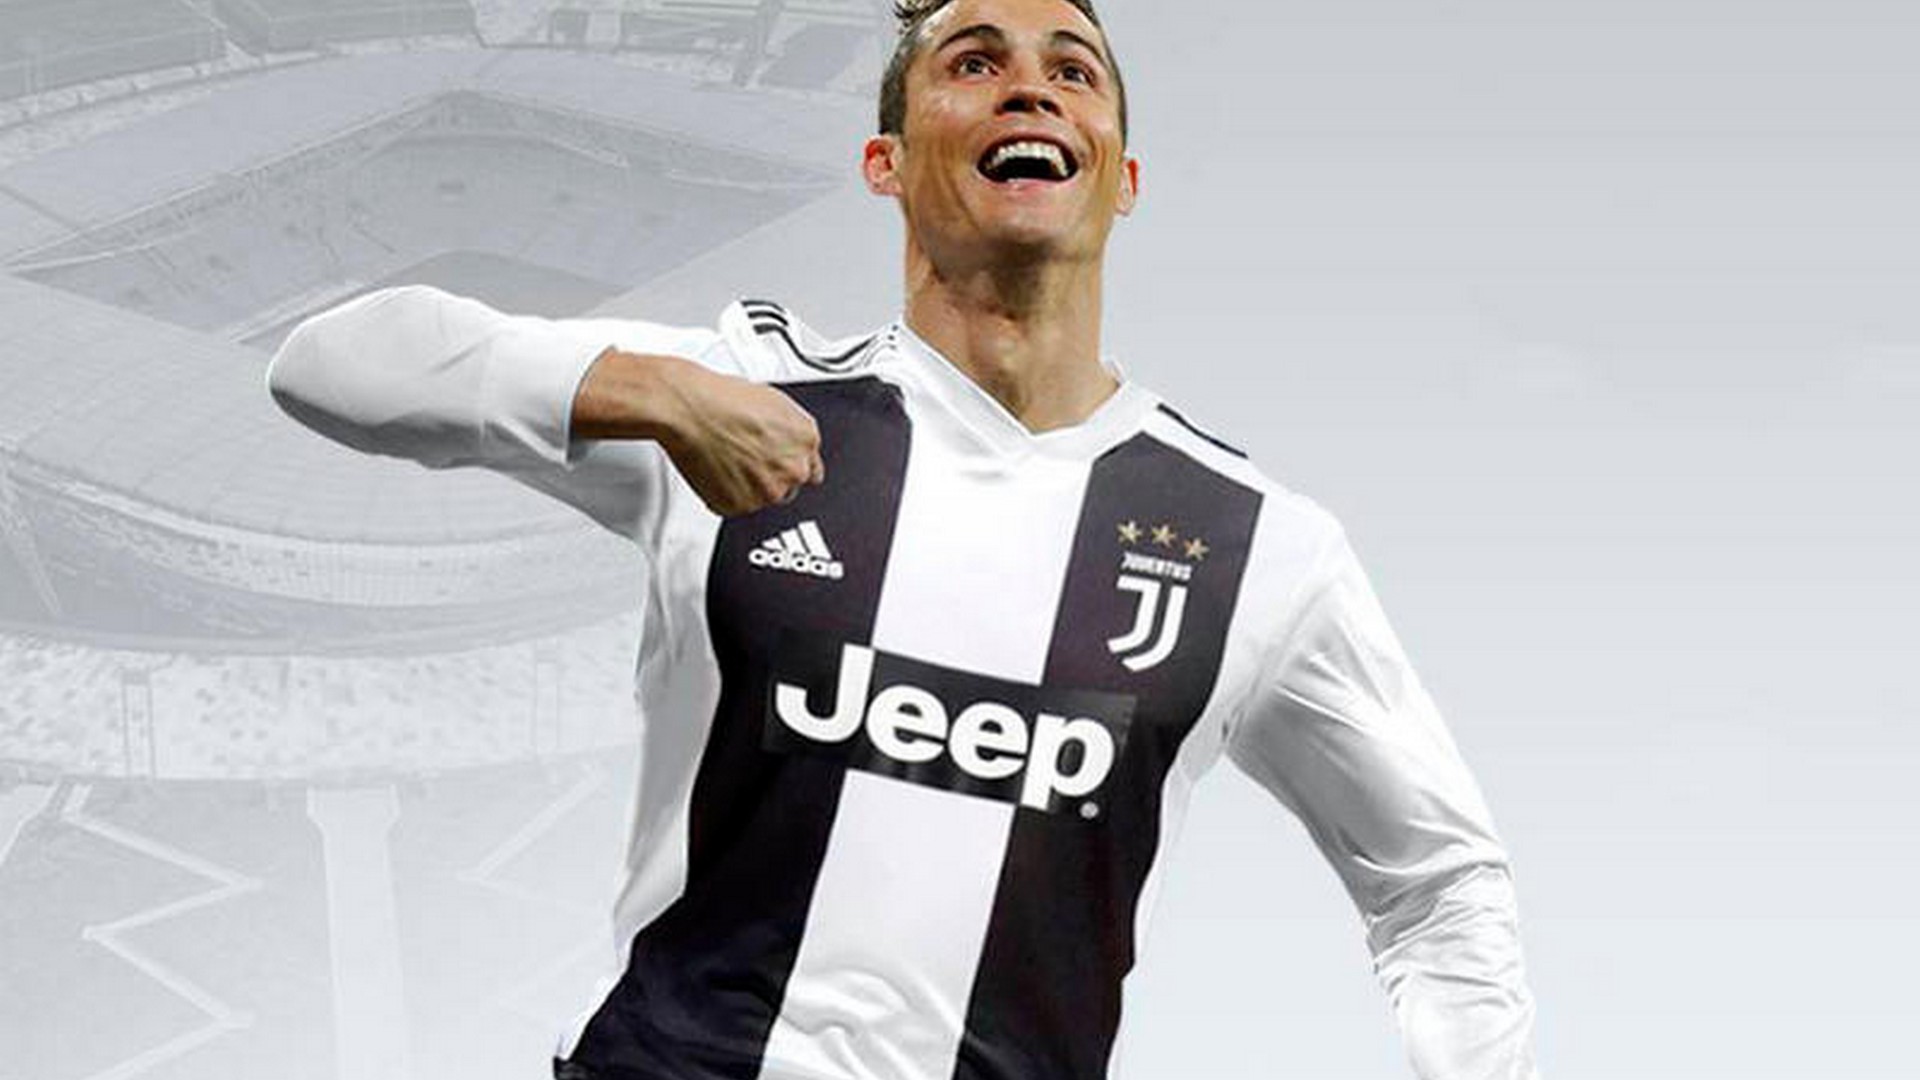 Desktop Wallpaper CR7 Juventus with image resolution 1920x1080 pixel. You can use this wallpaper as background for your desktop Computer Screensavers, Android or iPhone smartphones